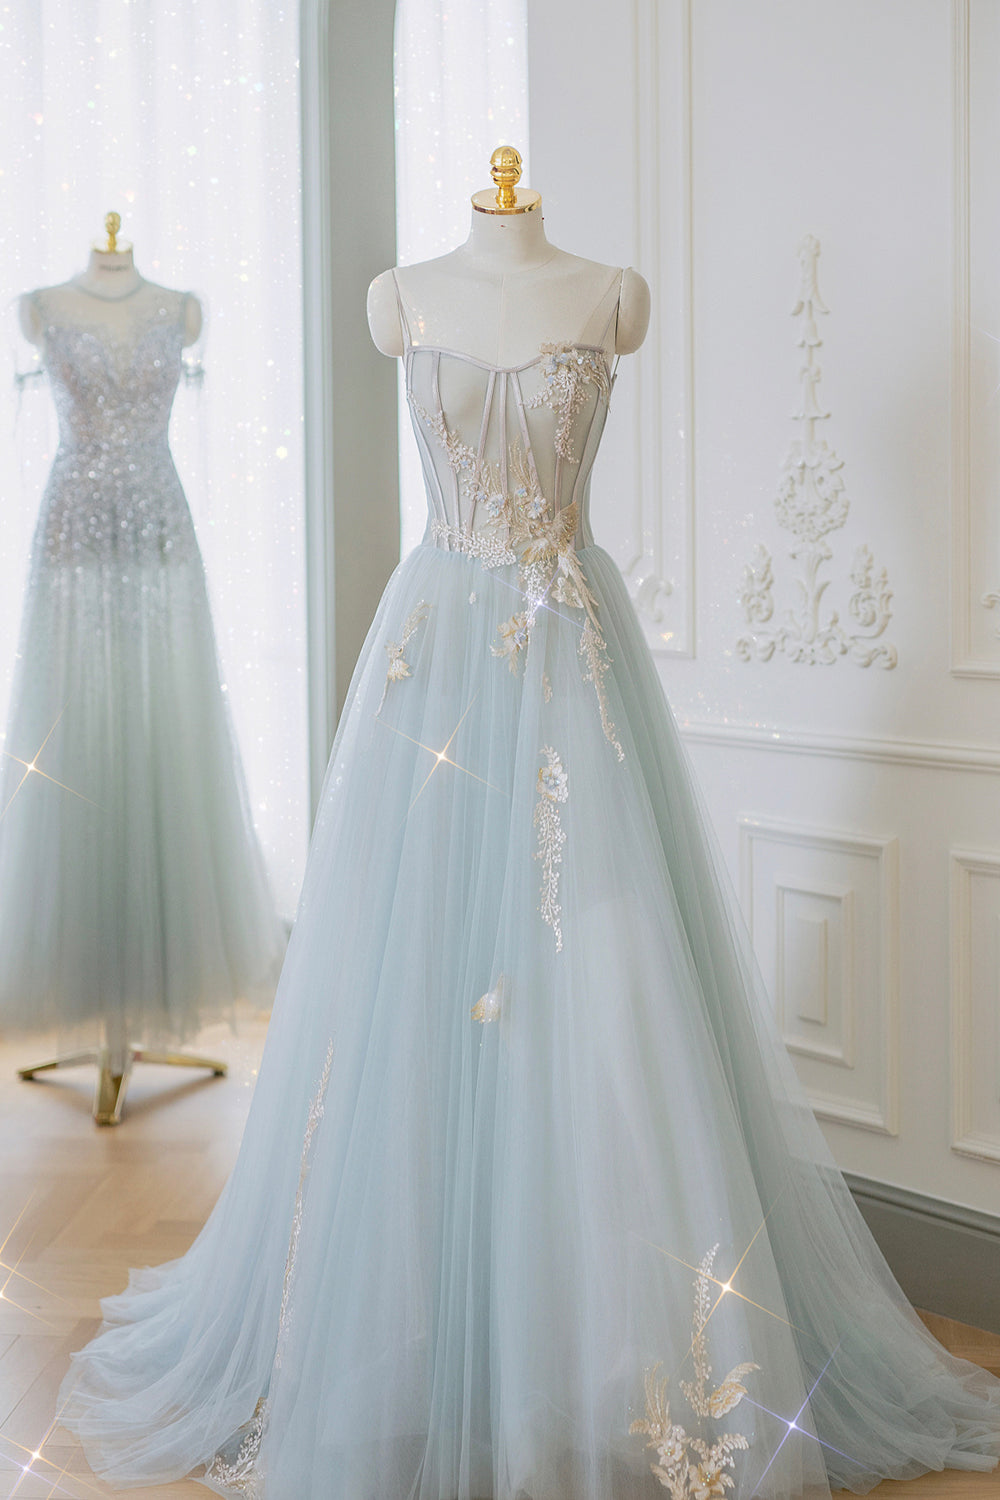 Bridesmaid Dress White, Blue Strapless Lace Formal Prom Dress, A-Line Tulle Evening Party Dress